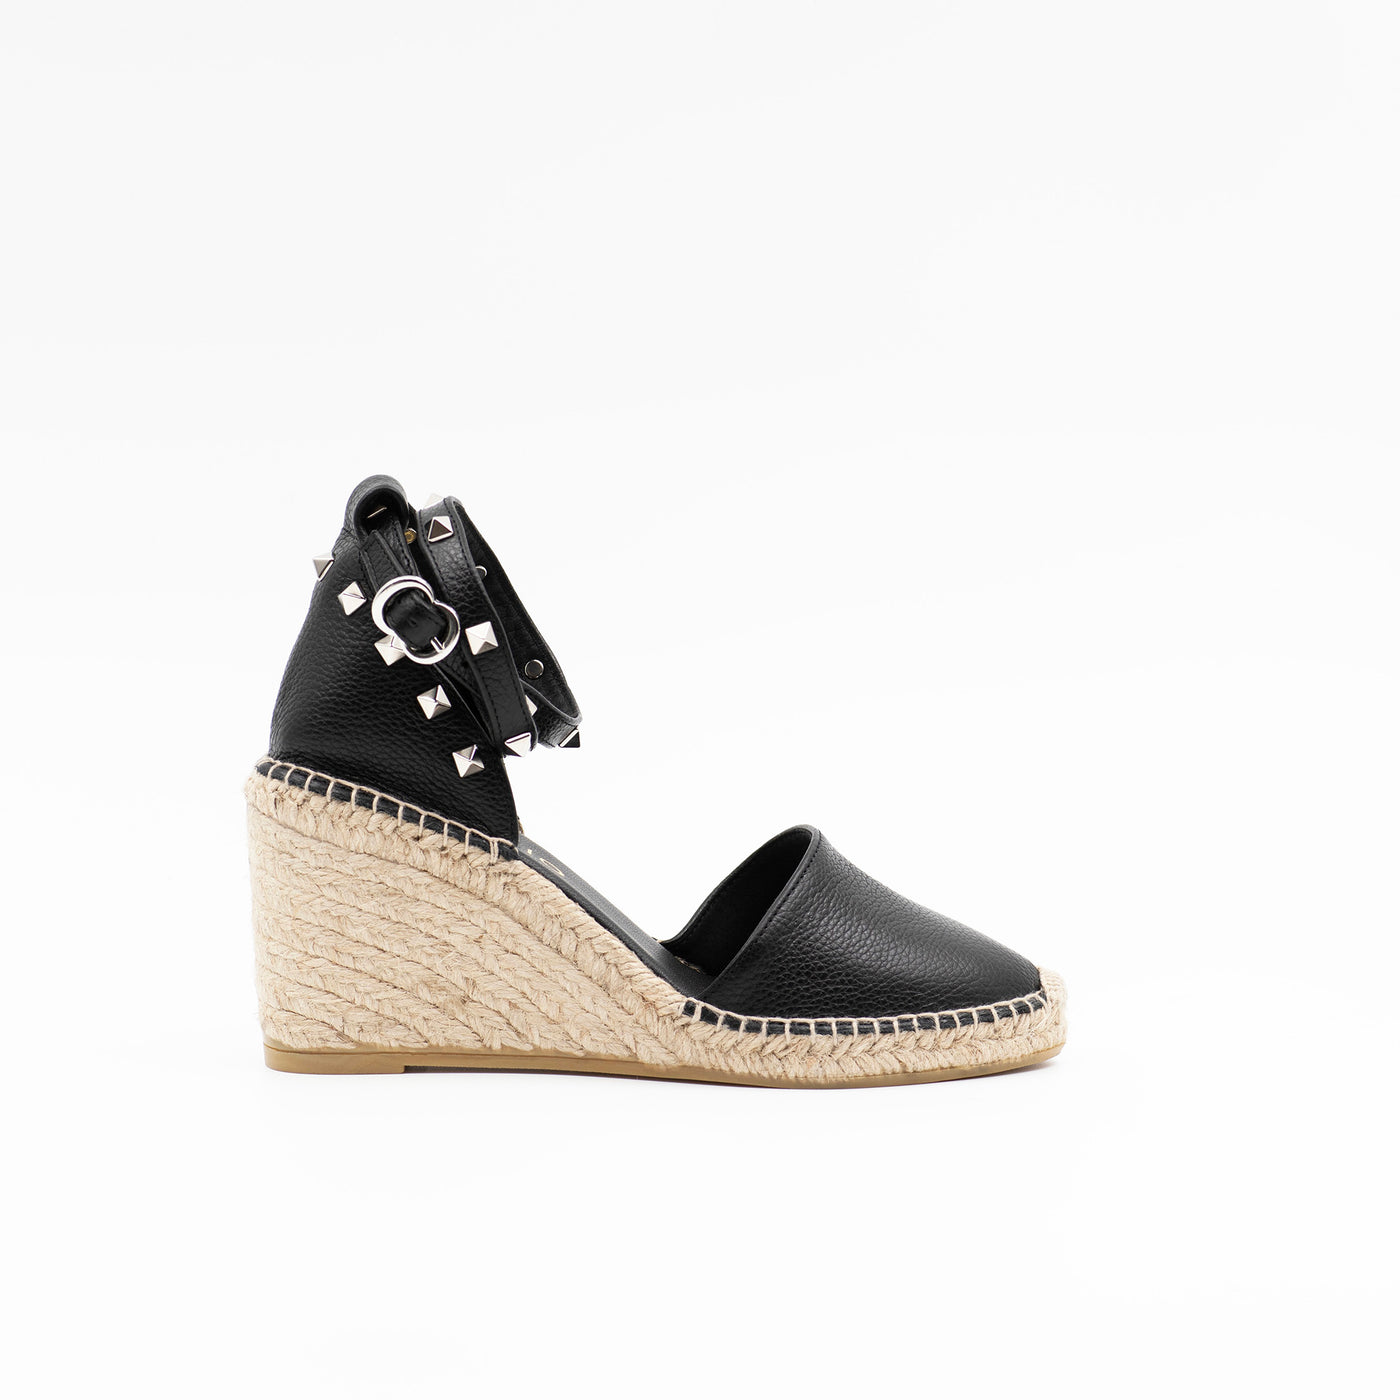 Wedge espadrille in black with silver studs